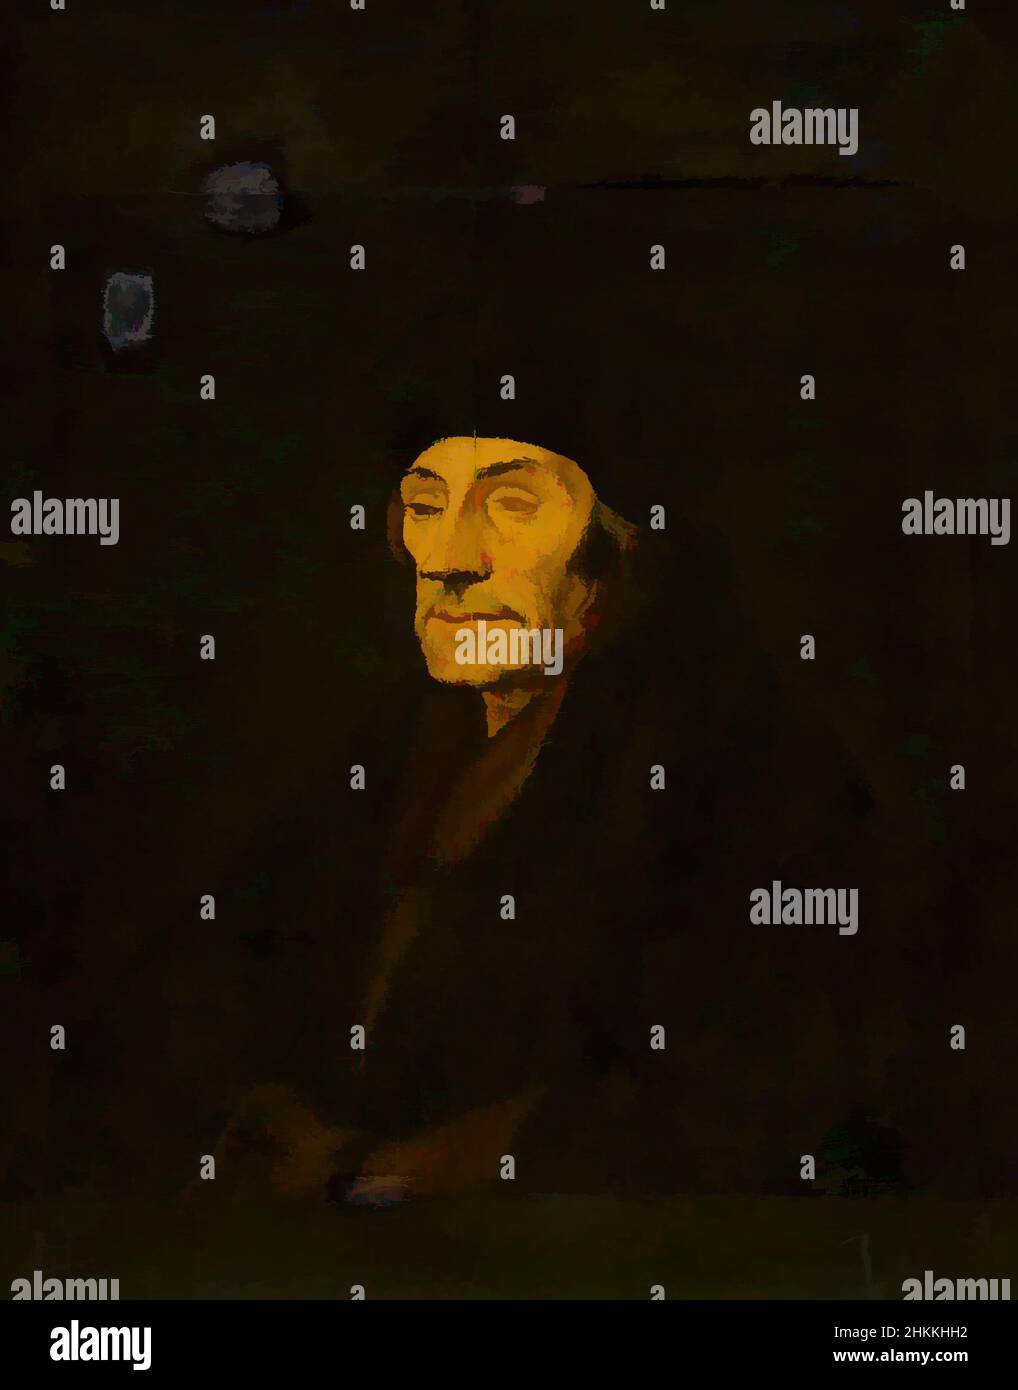 Art inspired by Portrait of Desiderius Erasmus 1466 / 69- 1536, Hans Holbein de Jonge, after, Classic works modernized by Artotop with a splash of modernity. Shapes, color and value, eye-catching visual impact on art. Emotions through freedom of artworks in a contemporary way. A timeless message pursuing a wildly creative new direction. Artists turning to the digital medium and creating the Artotop NFT Stock Photo